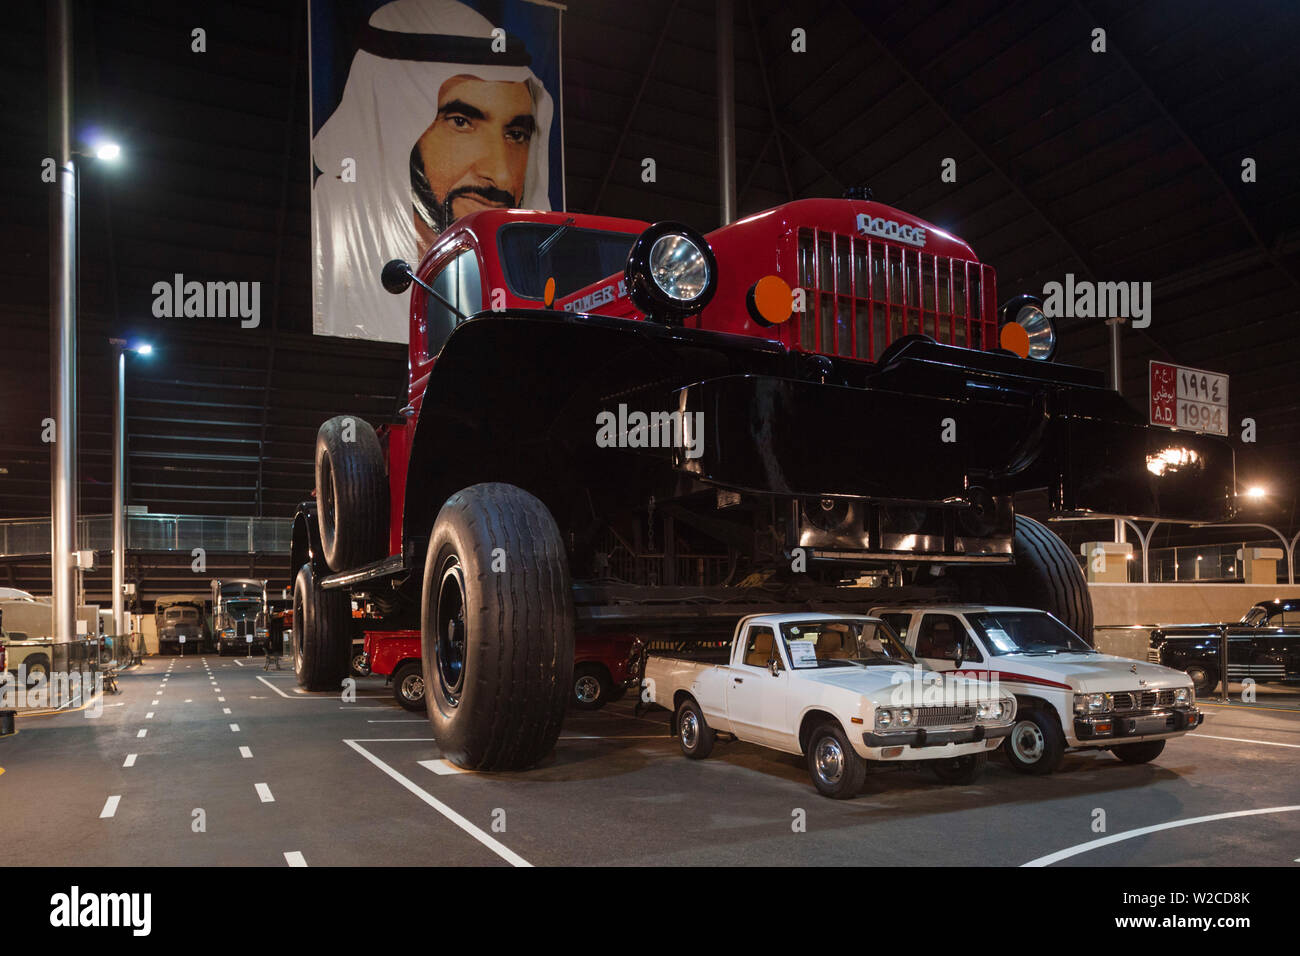 UAE, Abu Dhabi, Shanayl, Emirates National Car Museum, car collection of Sheikh Hamad Bin Hamdan Al Nahyan, also known as The Rainbow Sheikh, Dodge Power Wagon monster truck on mining truck chassis Stock Photo